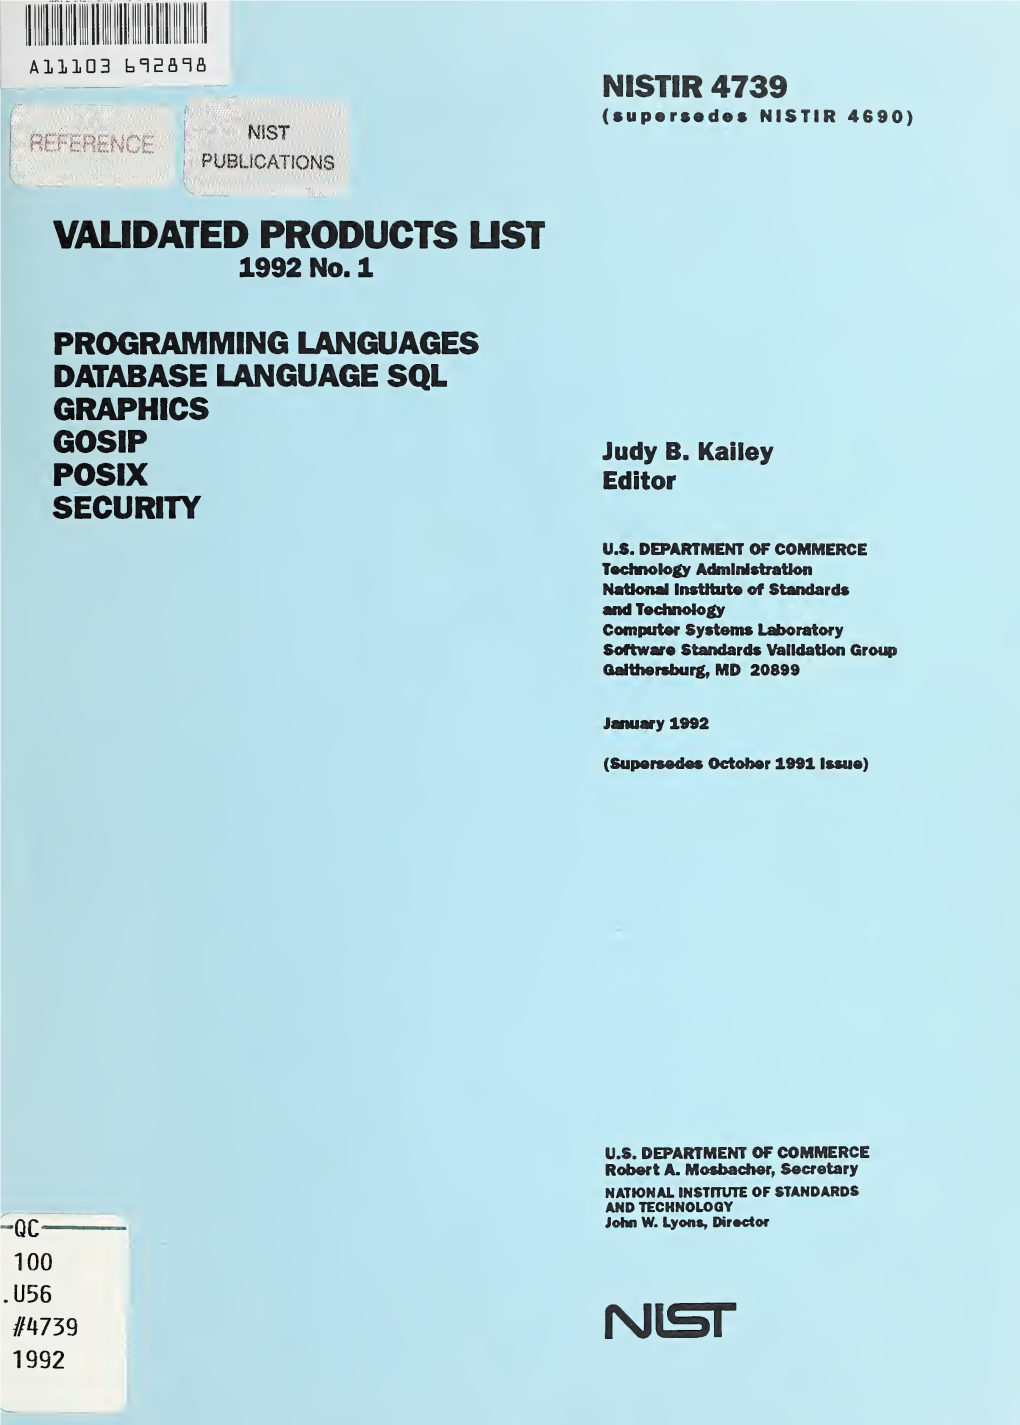 Validated Products List